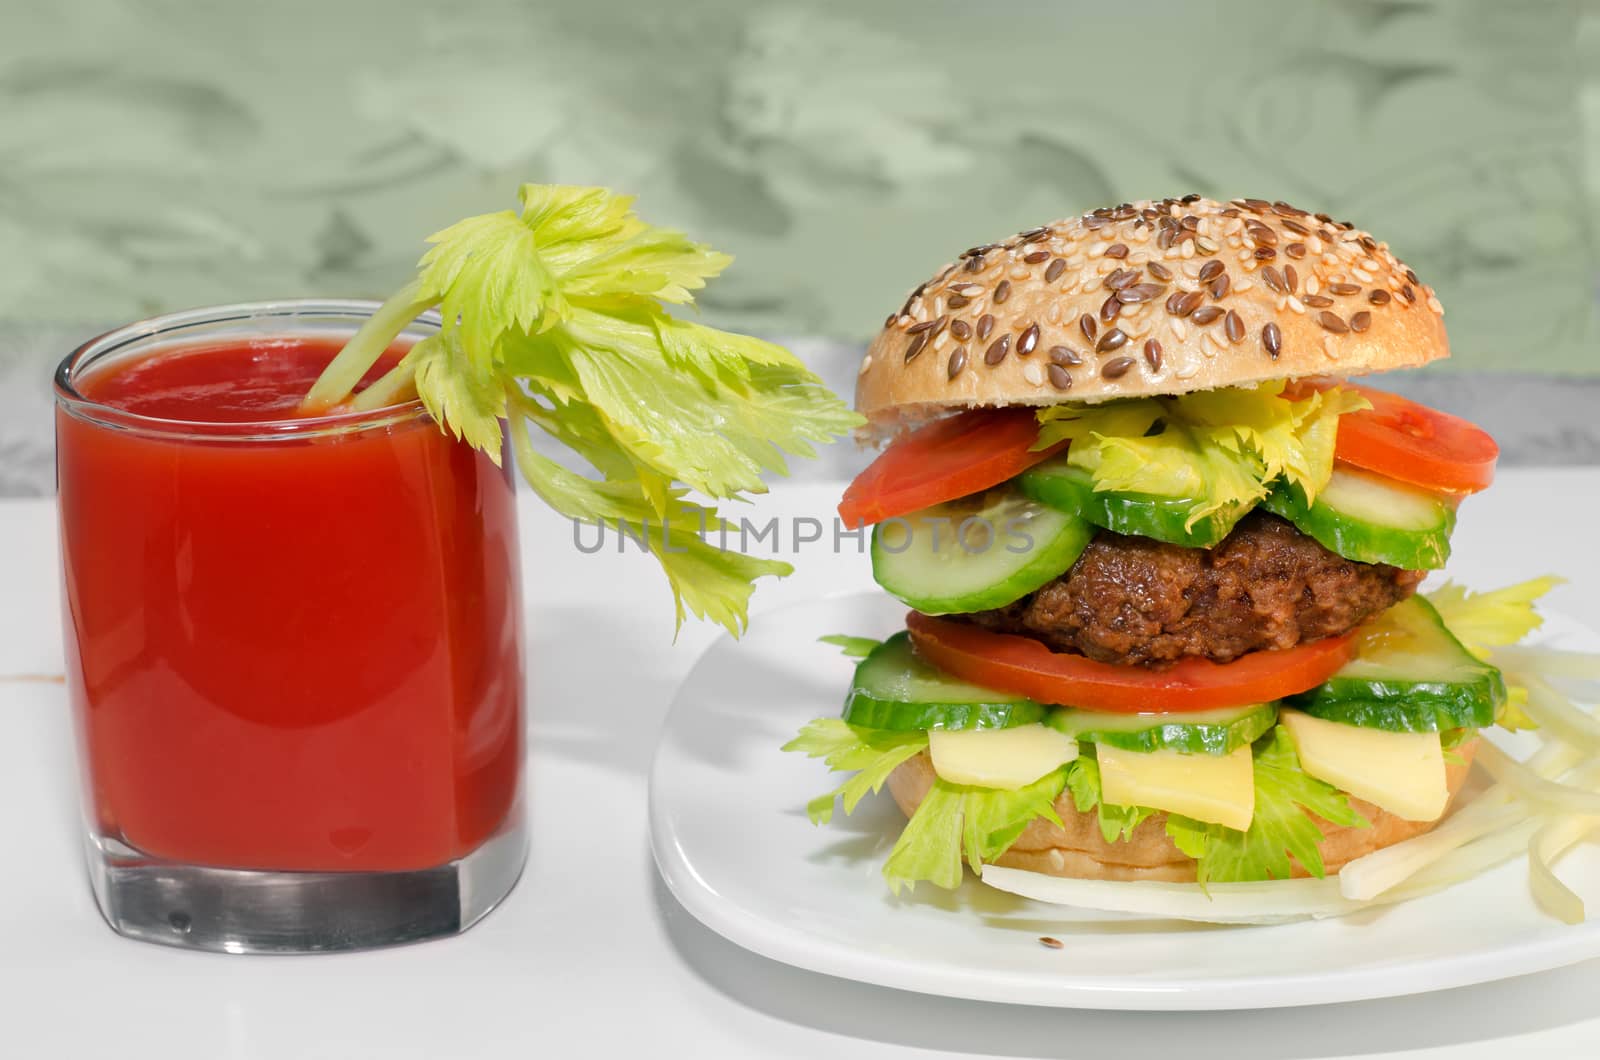 Great Burger and tomato juice with celery in the glass.